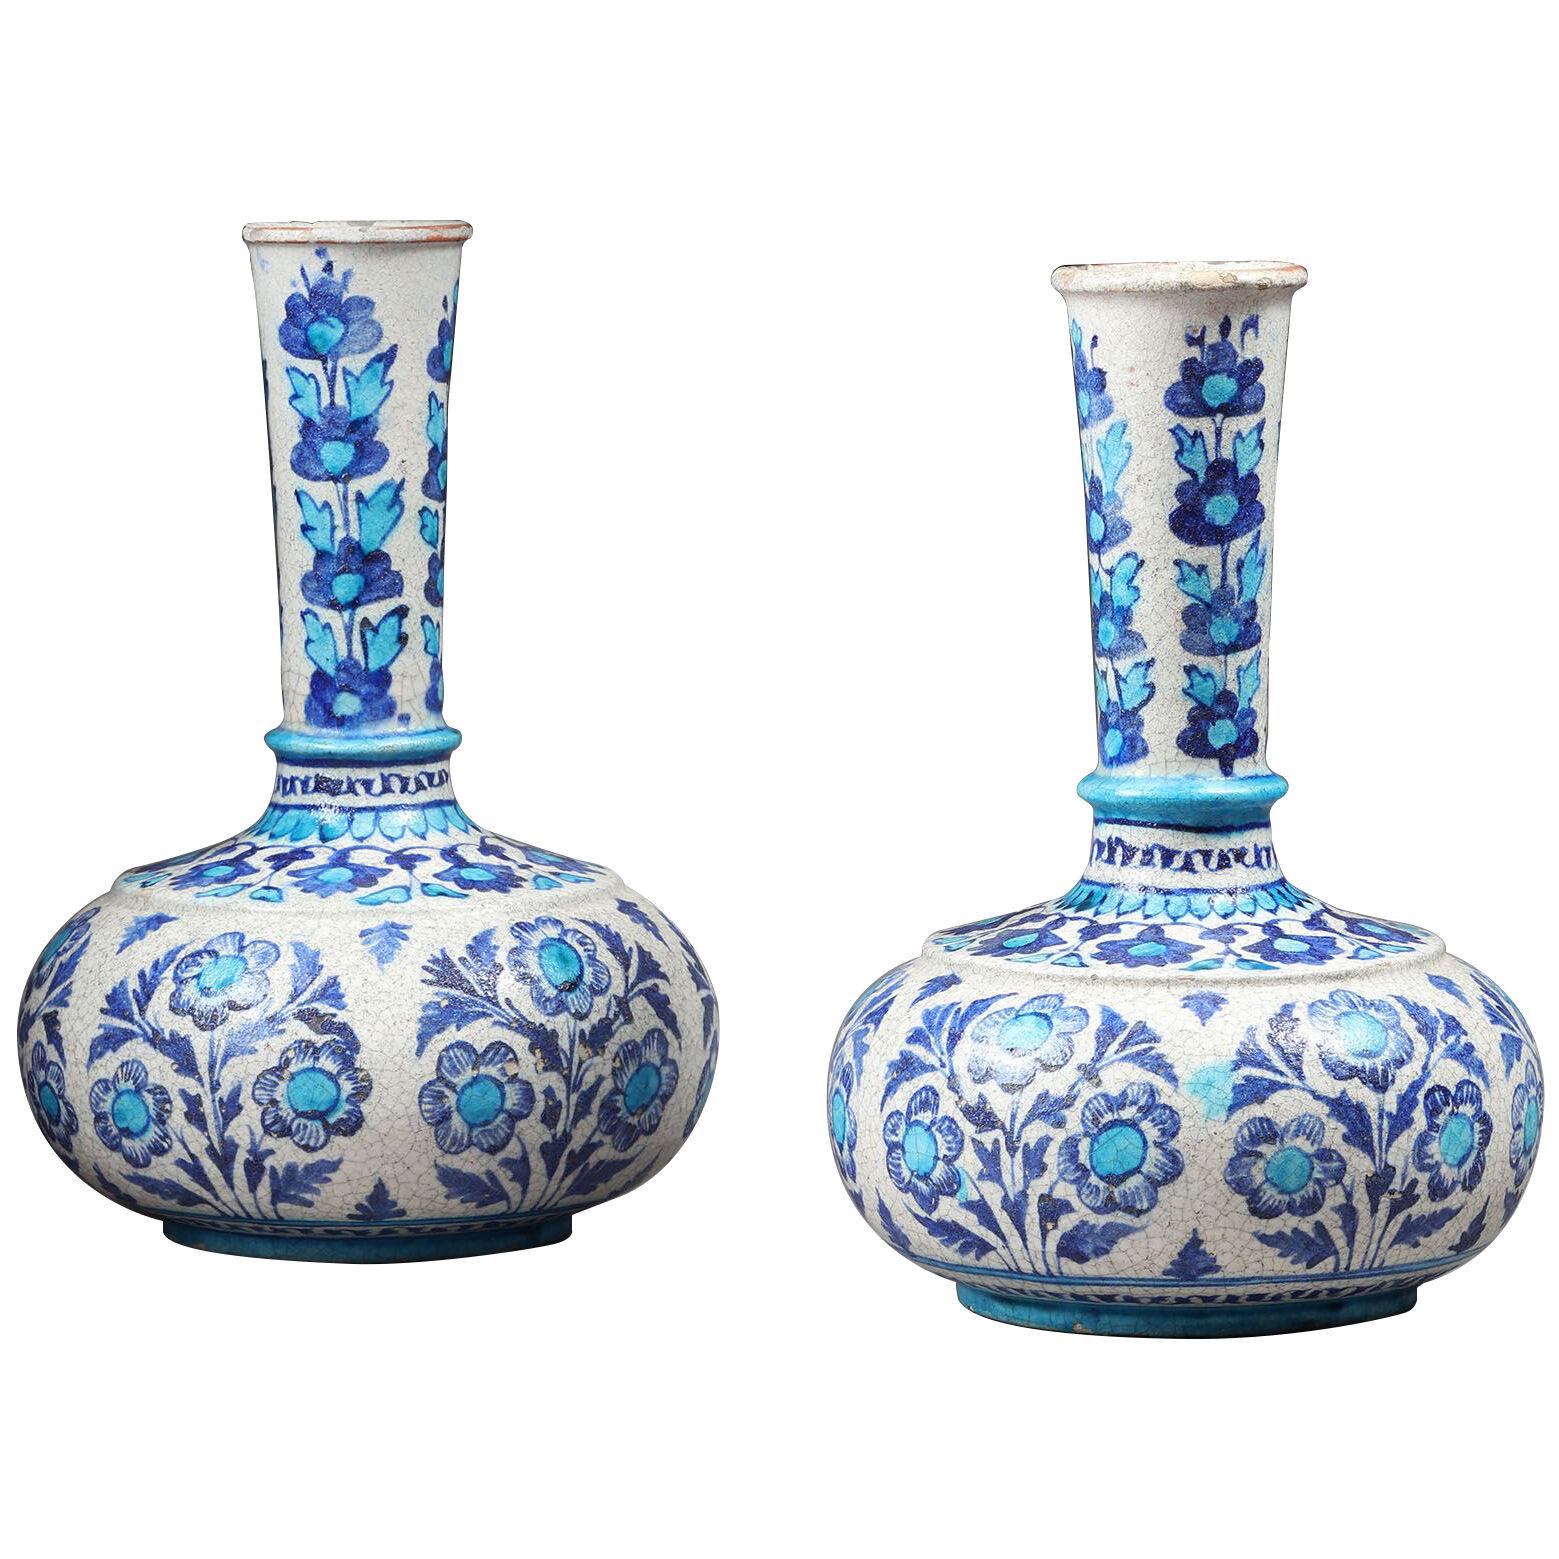 A near pair of Indian pottery vases